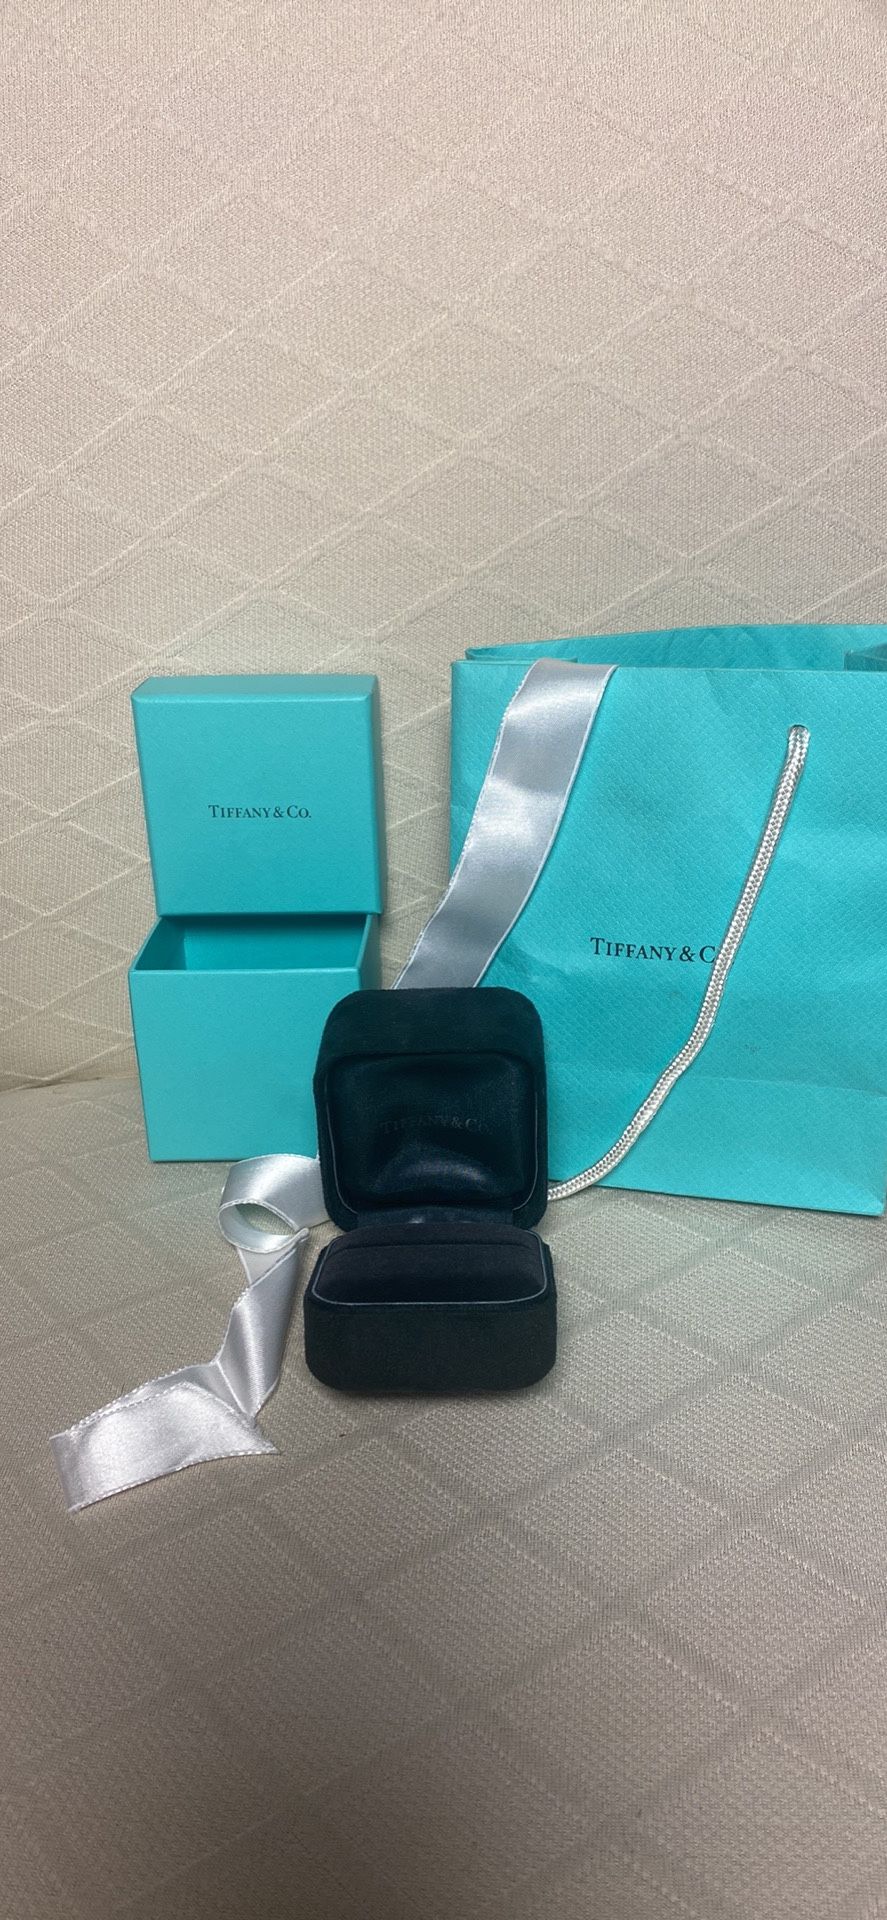 Authentic Tiffany! blue bag, black ring box, outer blue box and white ribbon